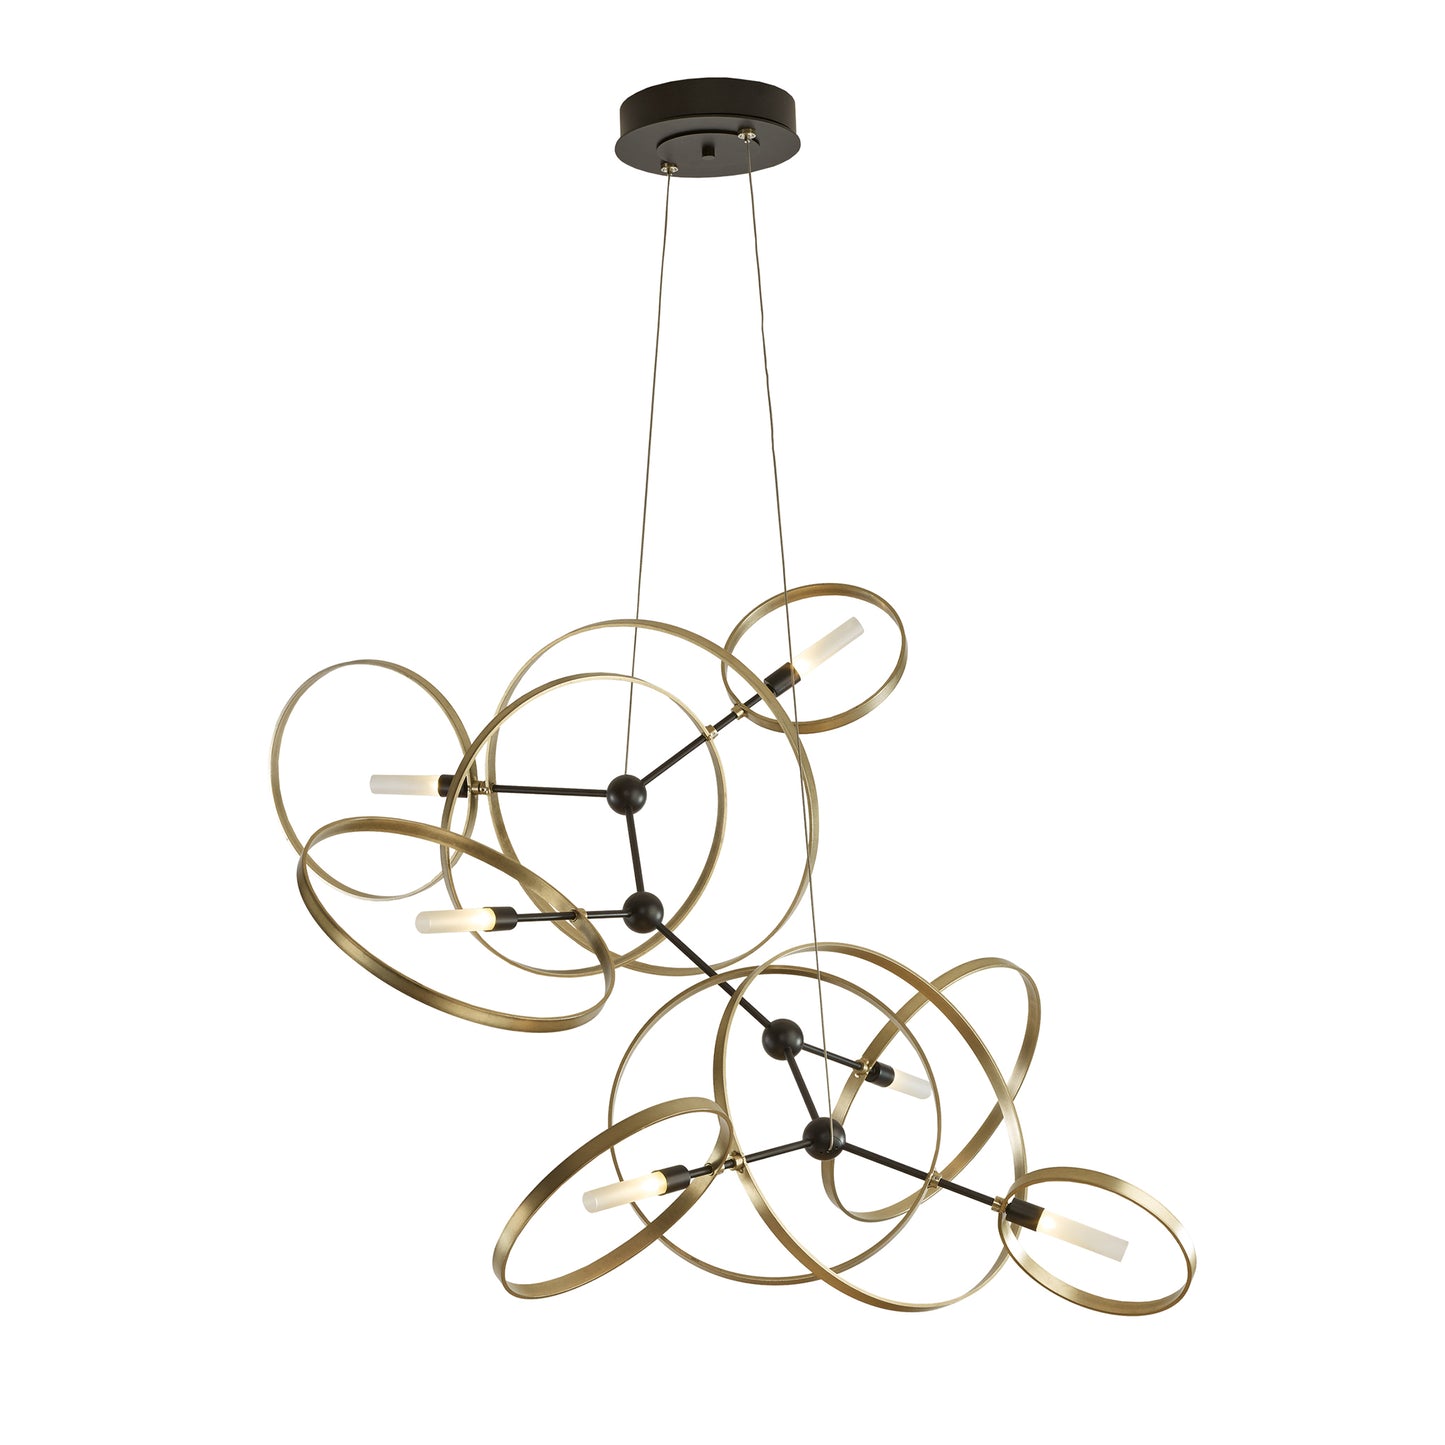 The Hubbardton Forge Celesse Pendant, a handcrafted lighting masterpiece by Hubbardton Forge, graces your space with its circular shape as it elegantly hangs from the ceiling.